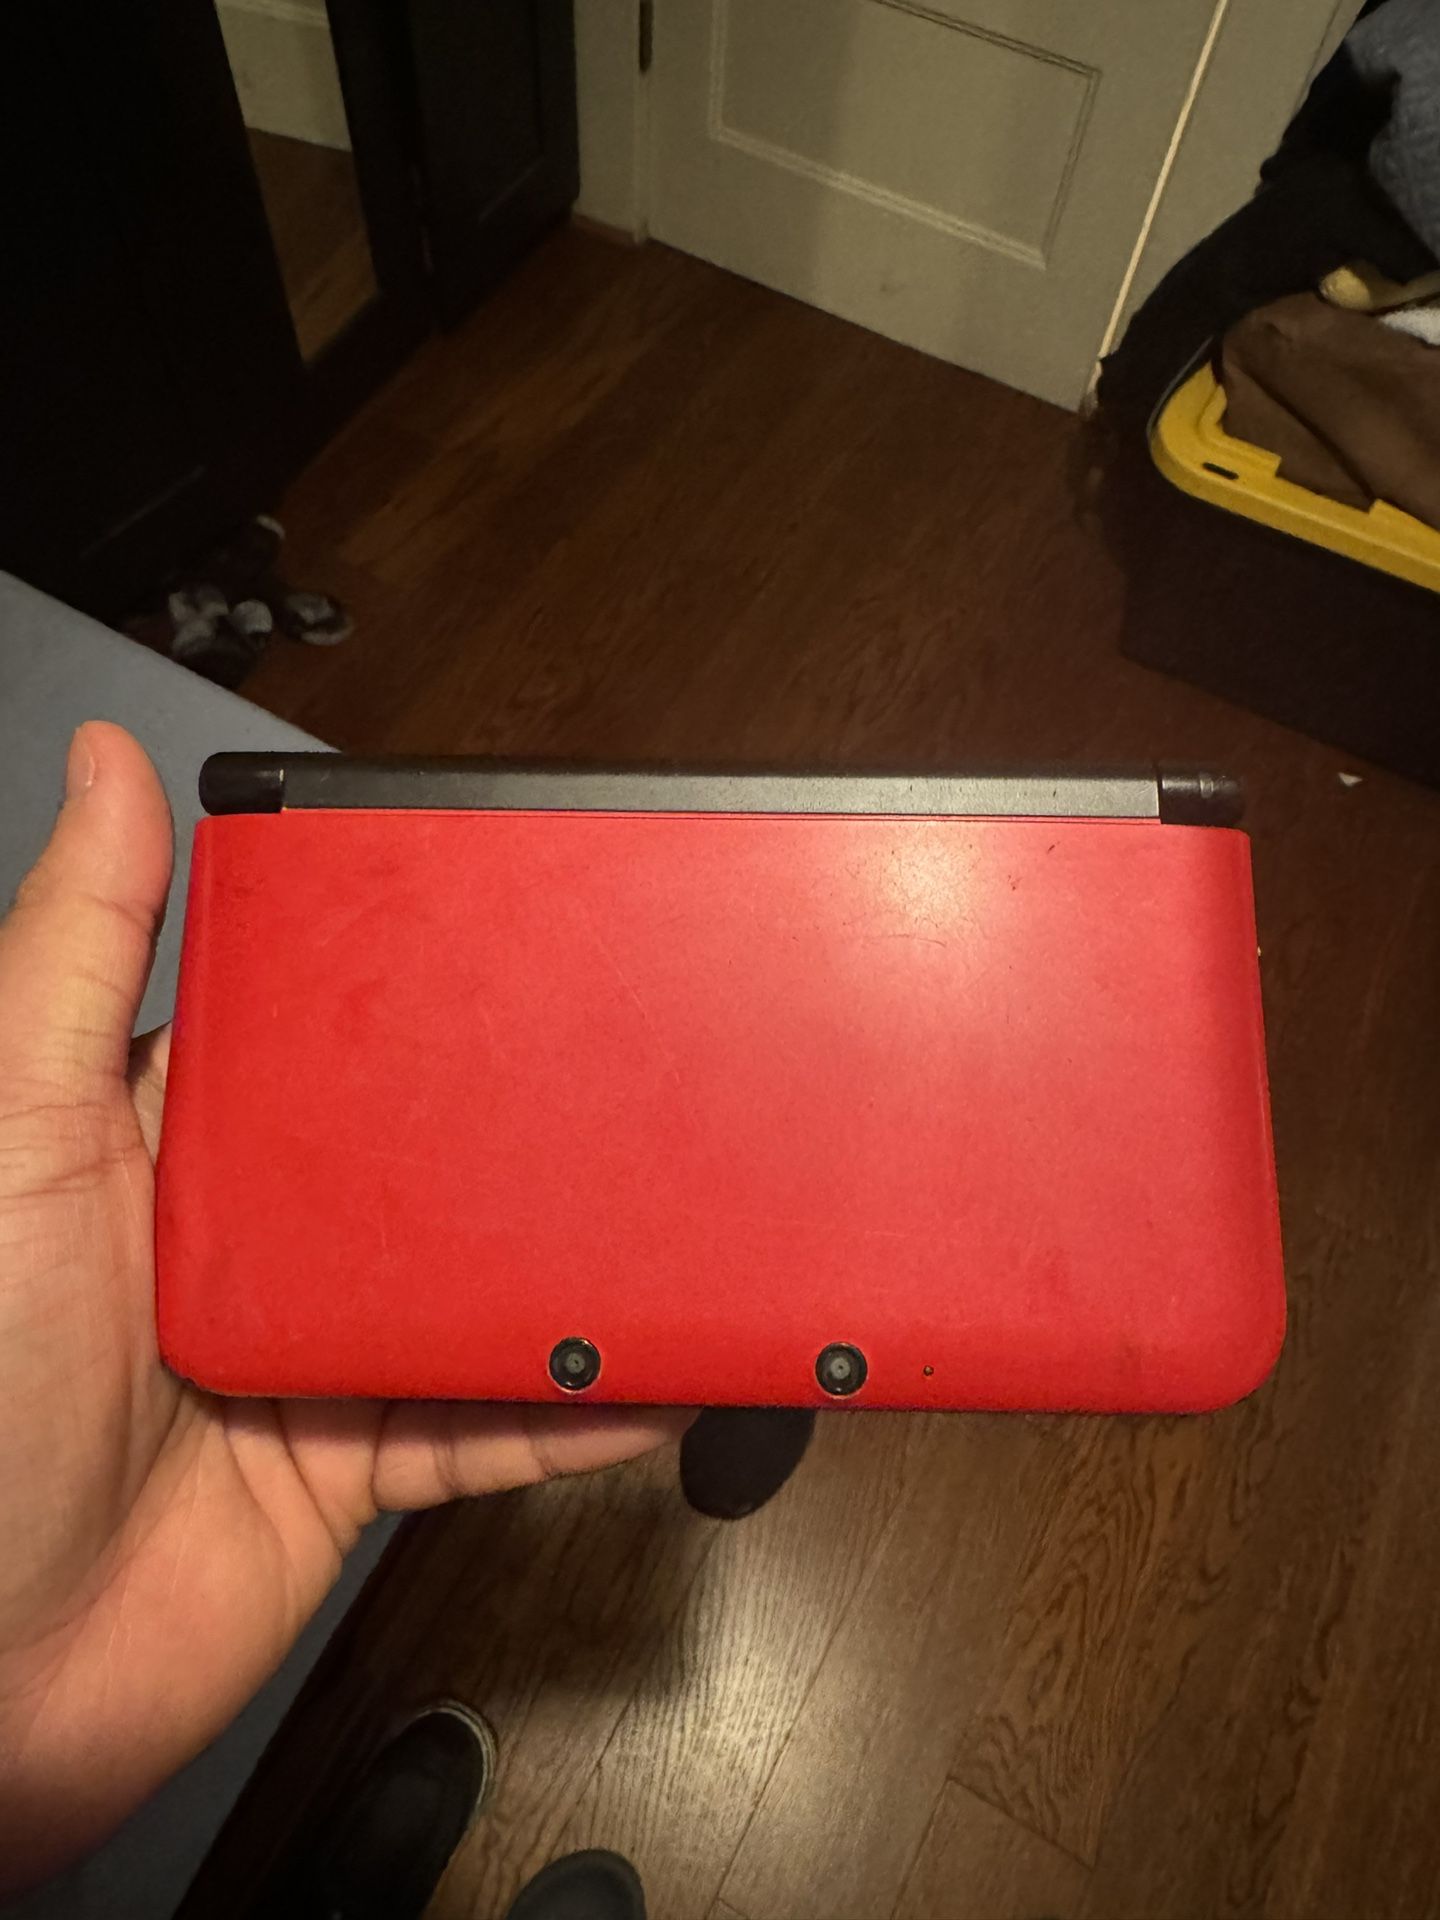 Nintendo 3Ds Red and Black 